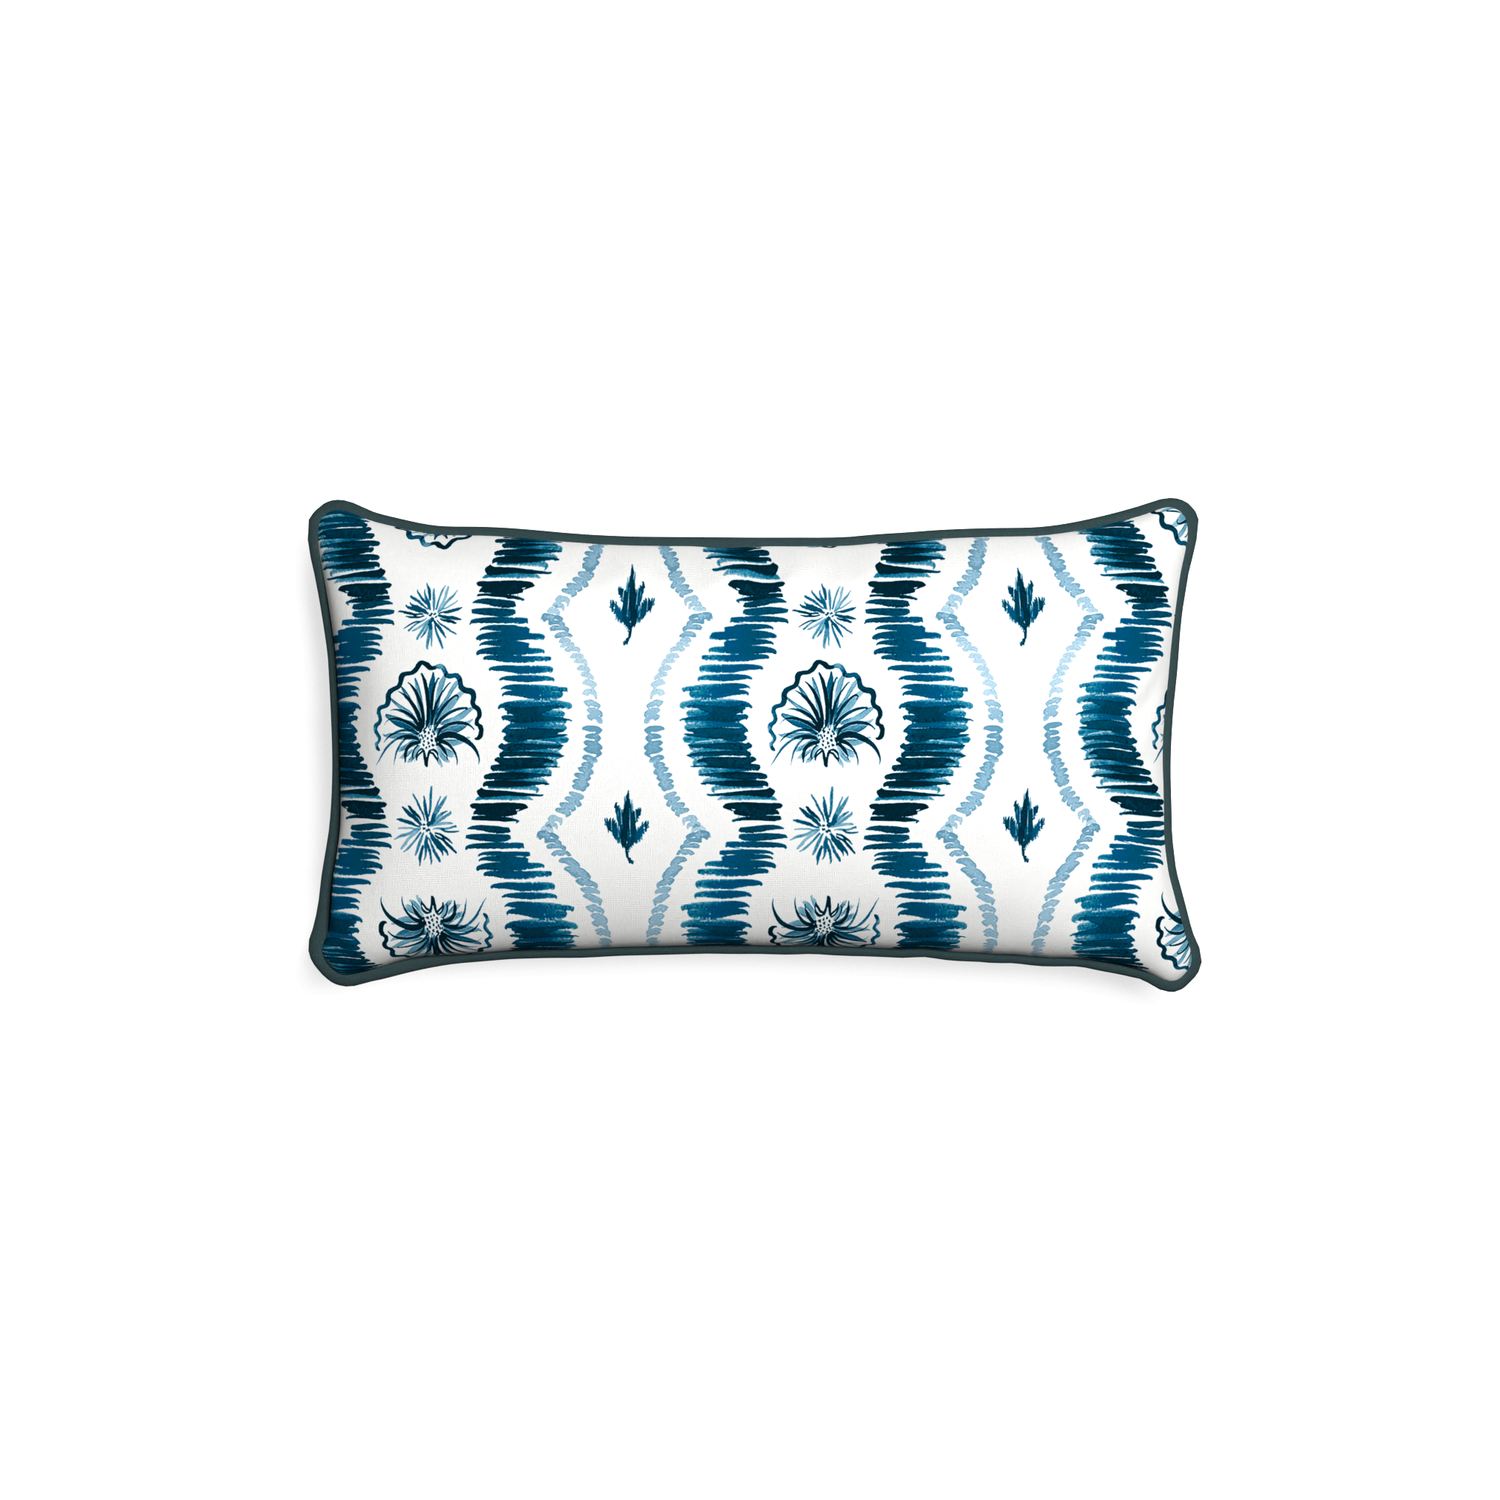 Petite-lumbar alice custom blue ikatpillow with p piping on white background